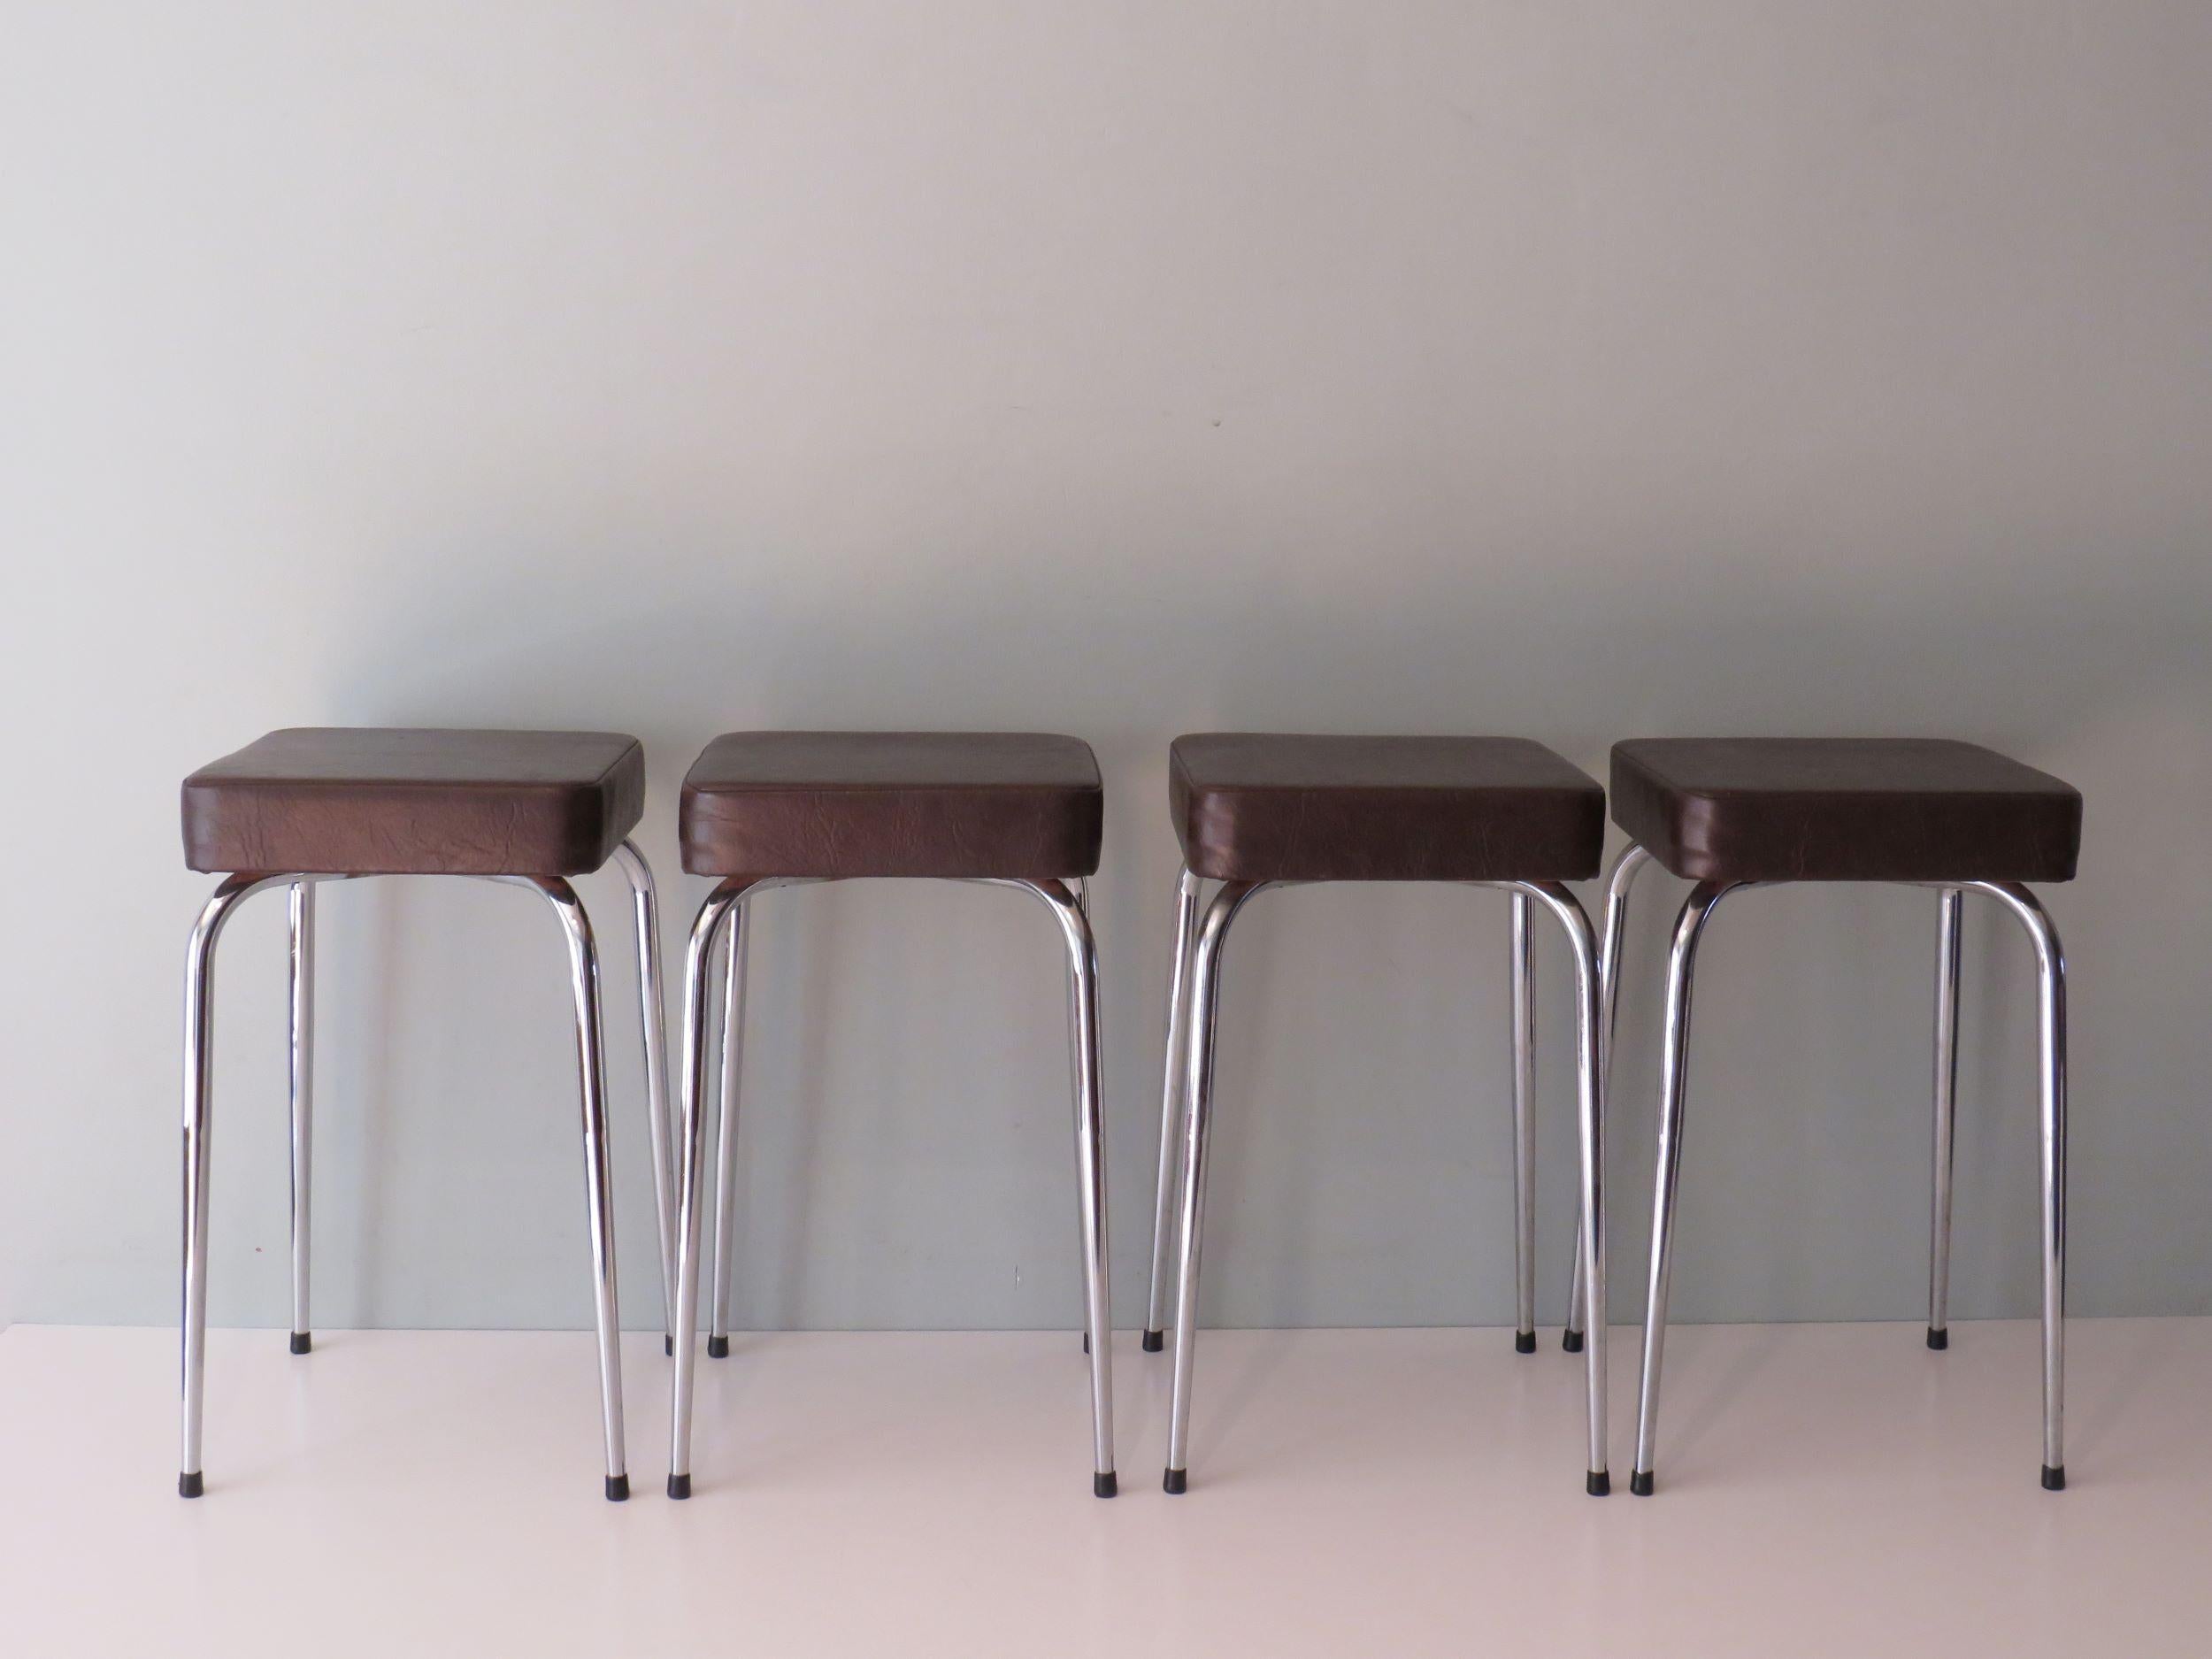 Nice set of 4 stools, the stools have a fairly thick seat which ensures good seating comfort.
All four have their original dark brown imitation leather upholstery and original caps at the bottom of the tapered legs.
The chairs are crosswise